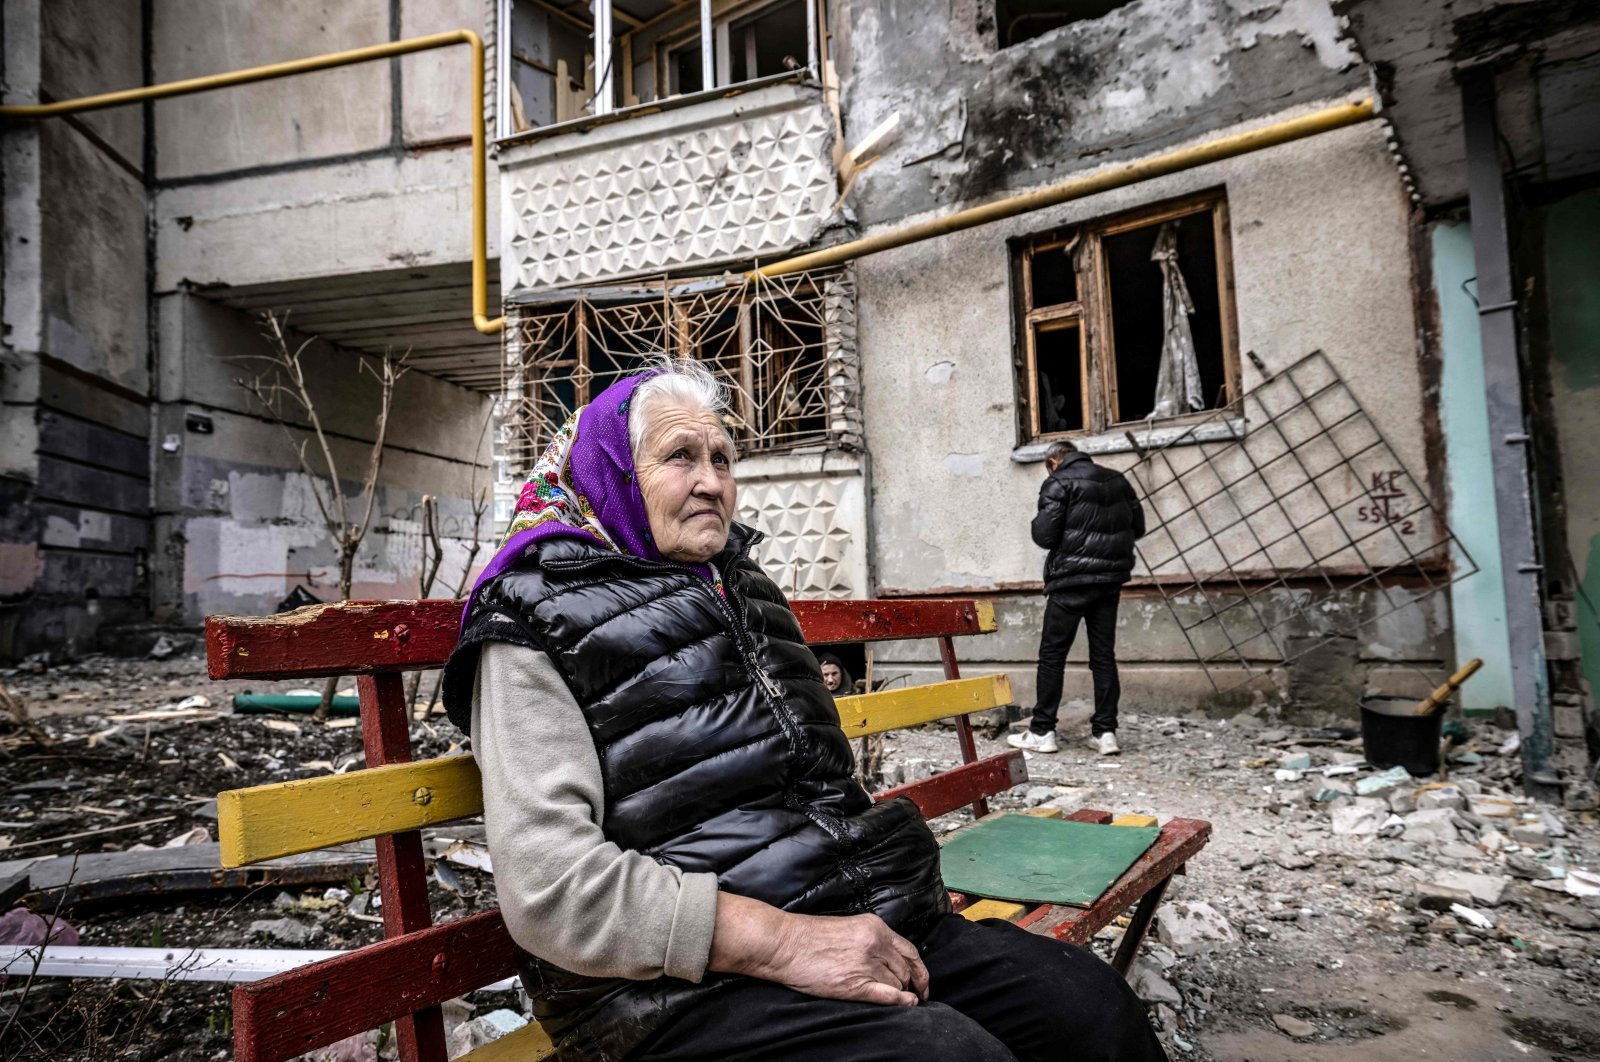 A woman looks on as she sits on a bench outside a destroyed building in the eastern Ukraine city of Kharkiv on April 2, 2022. (AFP Photo)